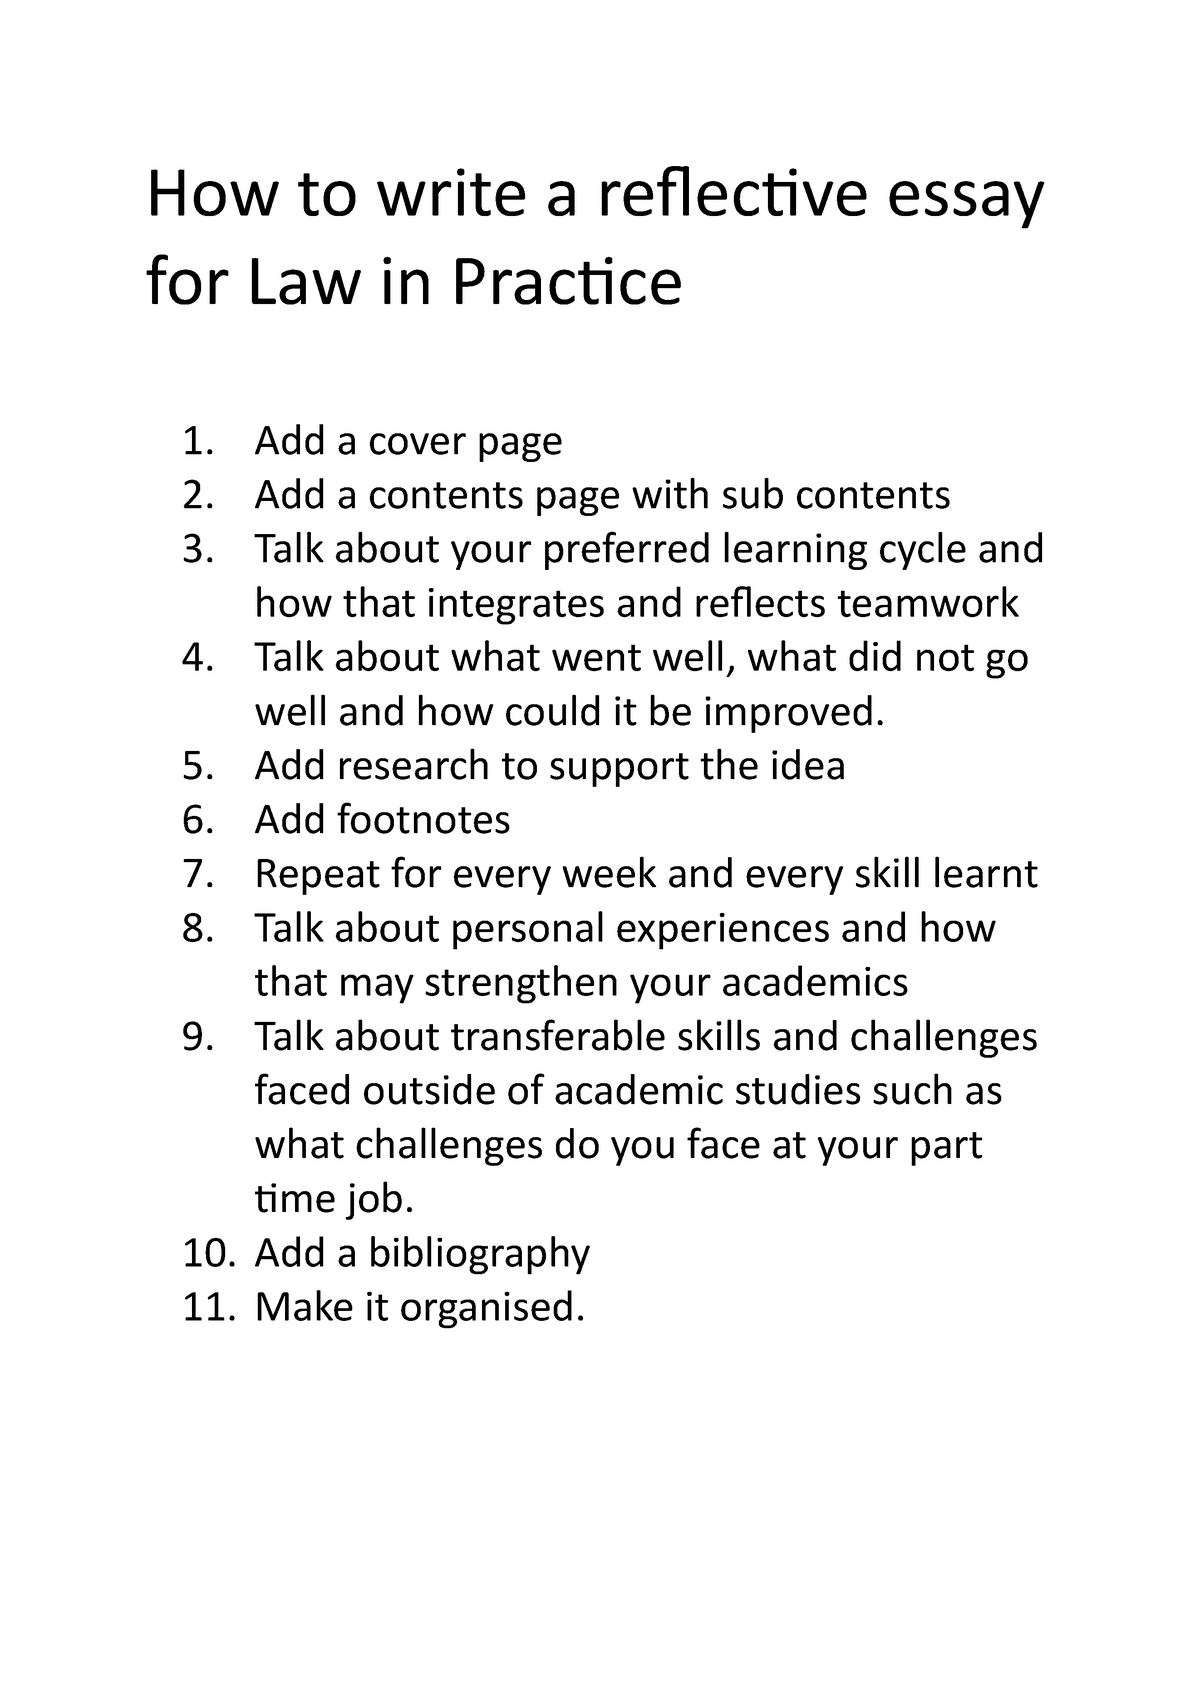 law in practice reflective essay